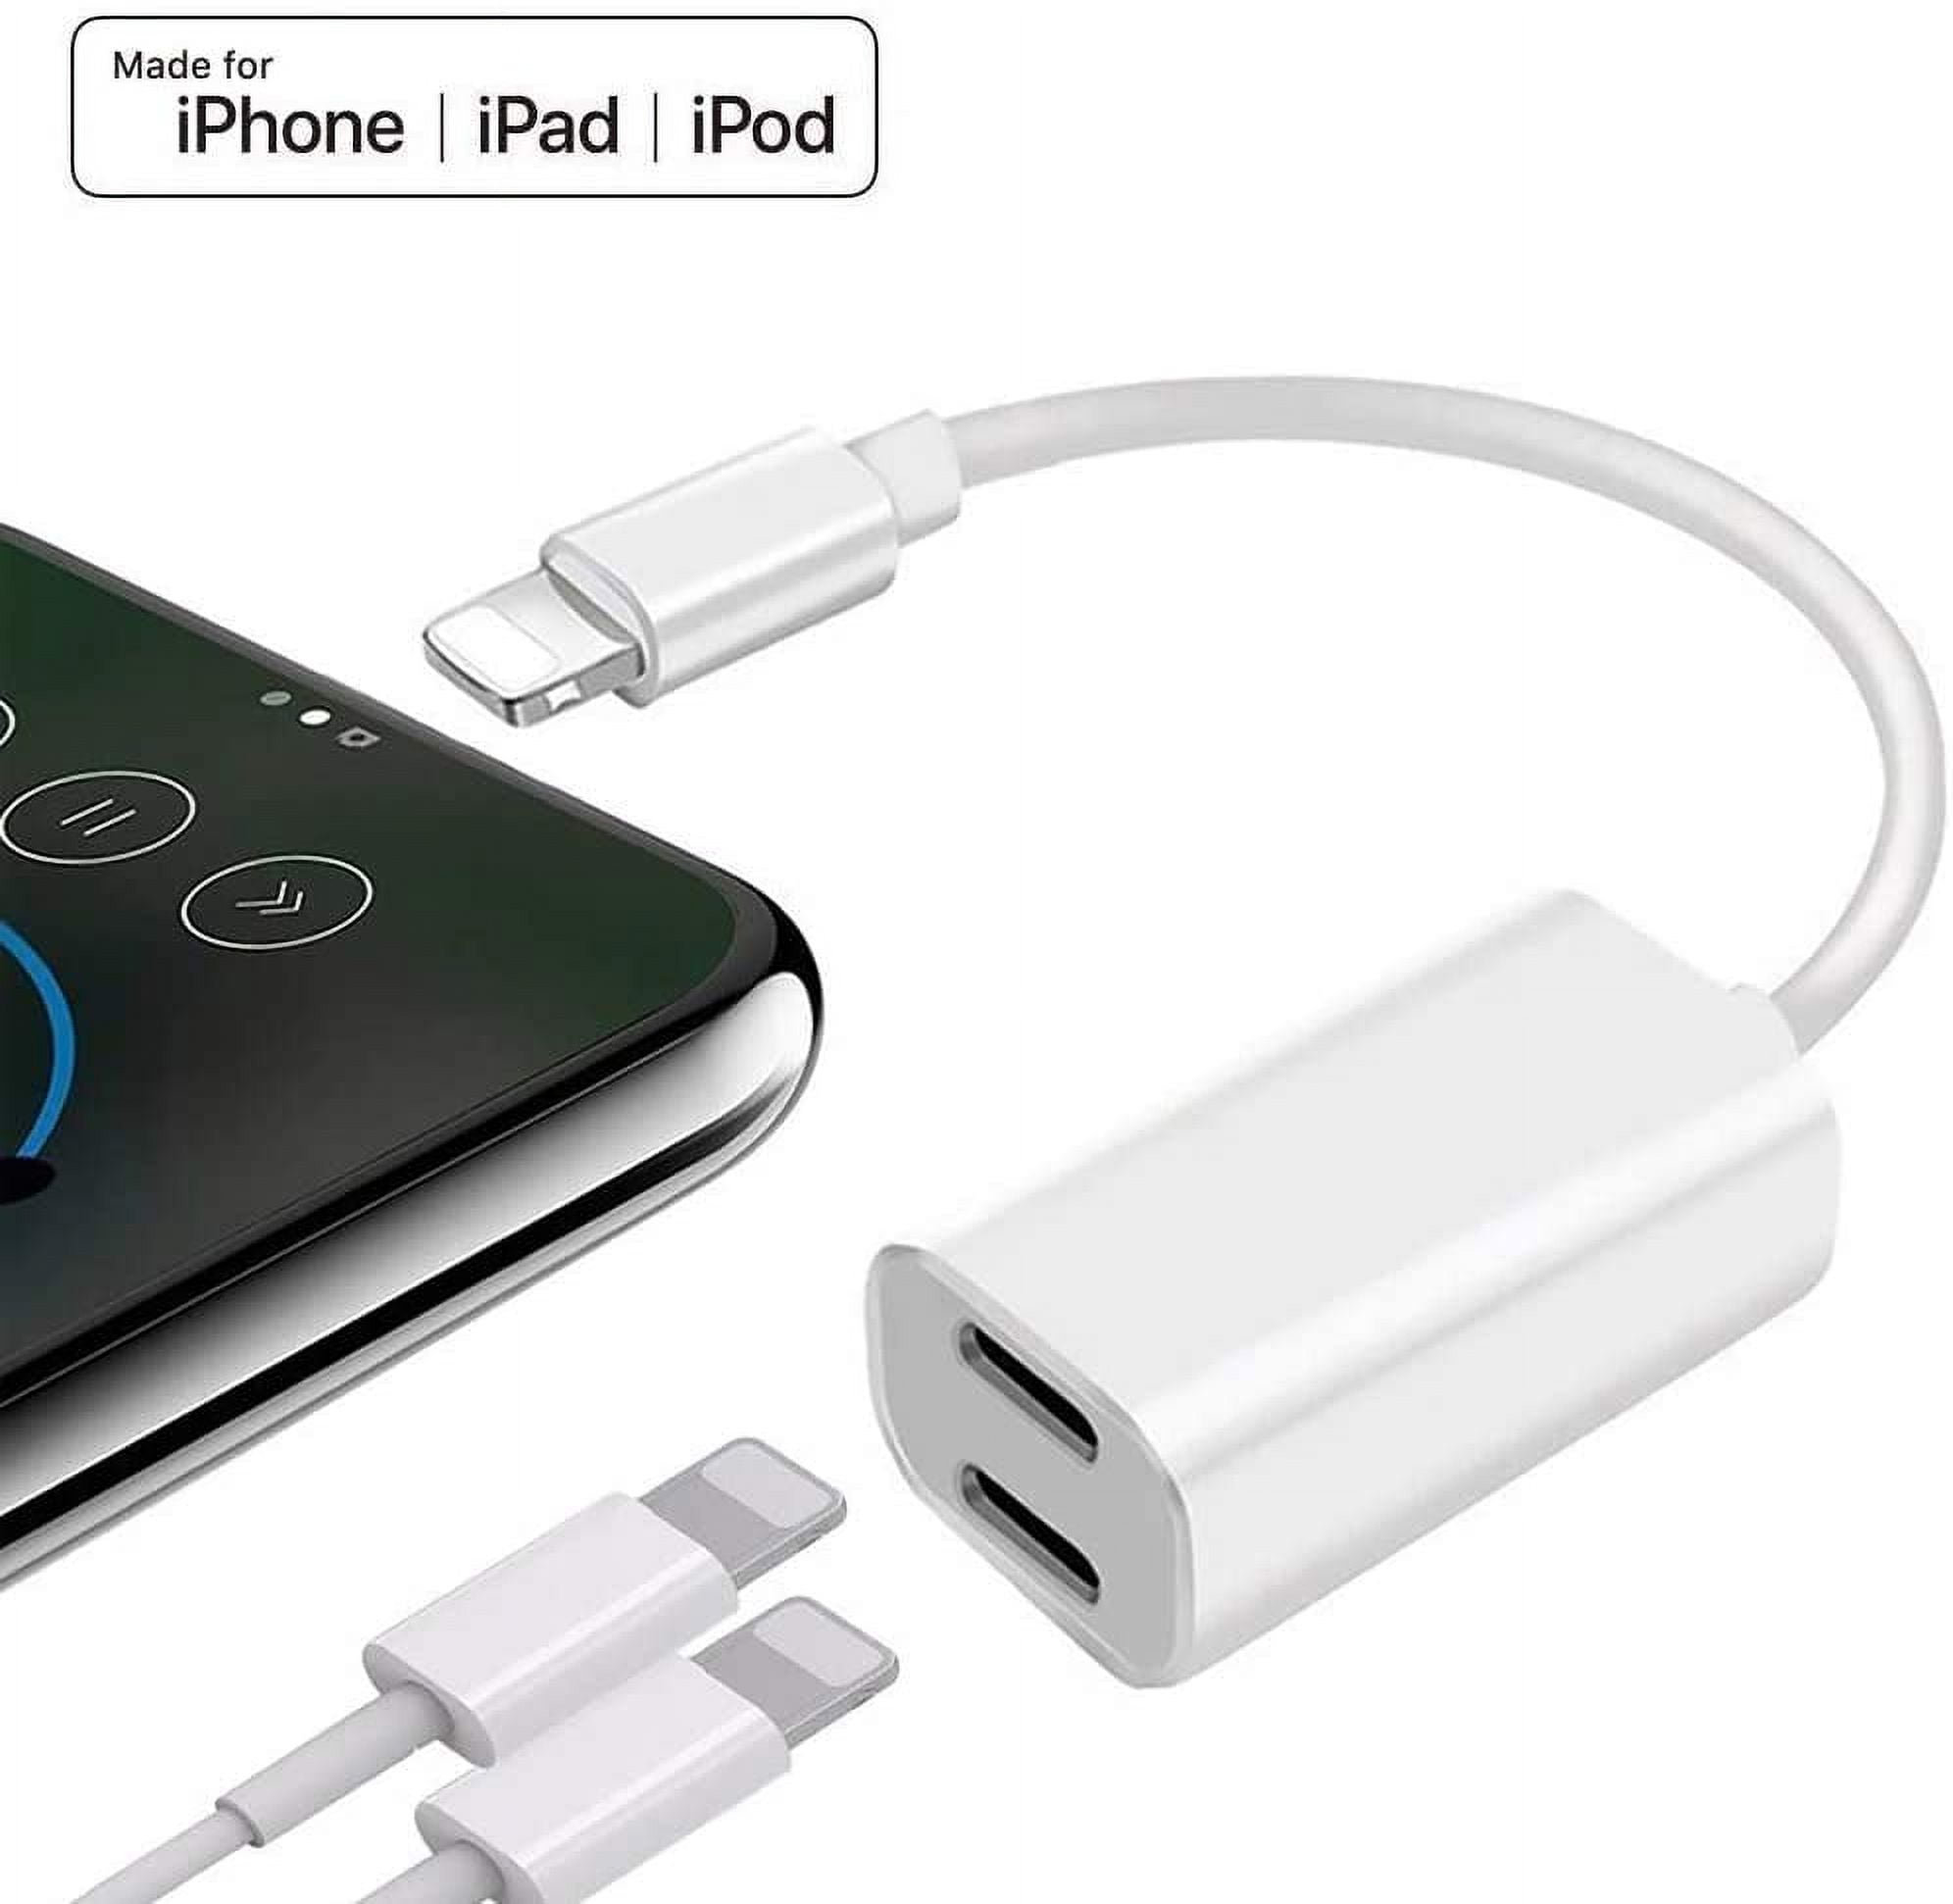 Dual Lightning iPhone Splitter,iPhone Adapter Headphones Audio & Charge  Cable Compatible iPhone 11 Pro X Xs Max Xr 7 8 Plus iPad, Support Calling  Sync Music Control, iOS 12 13 